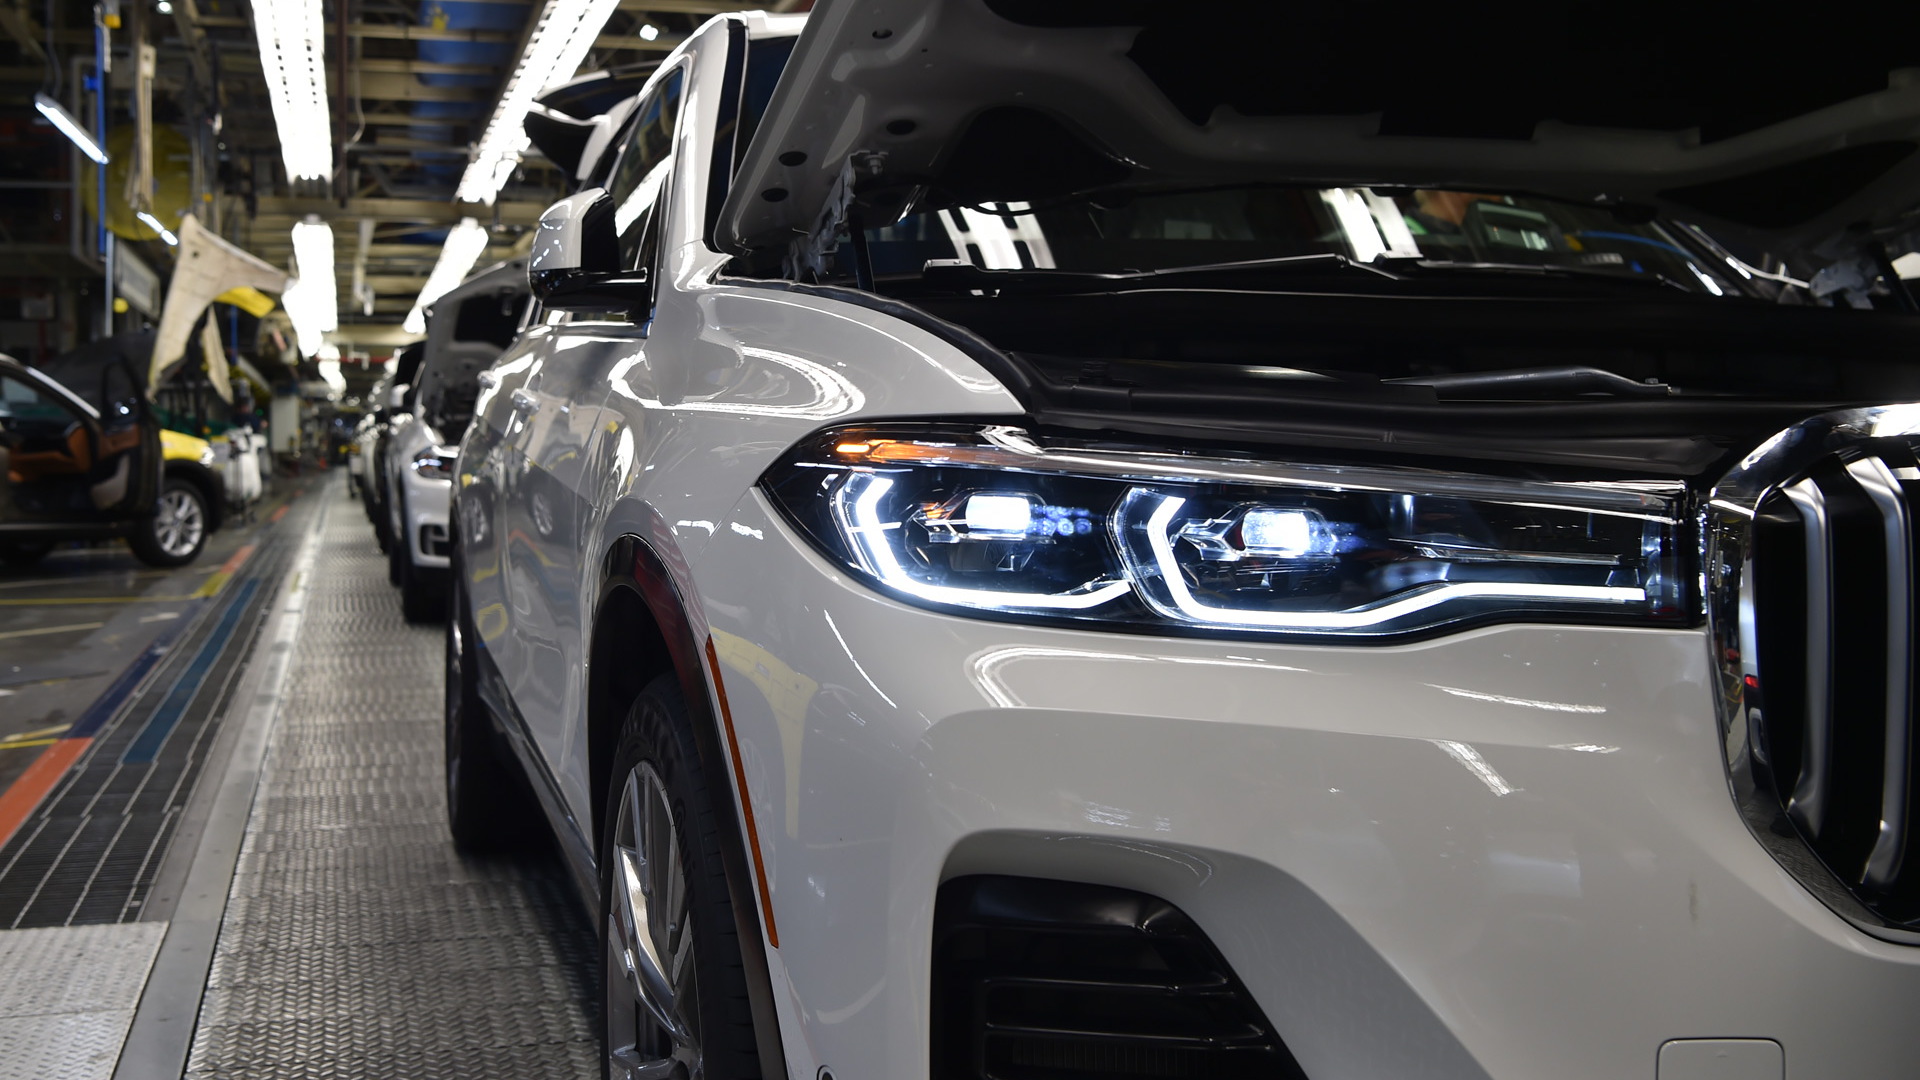 BMW X7 pre-production at plant in Spartanburg, South Carolina